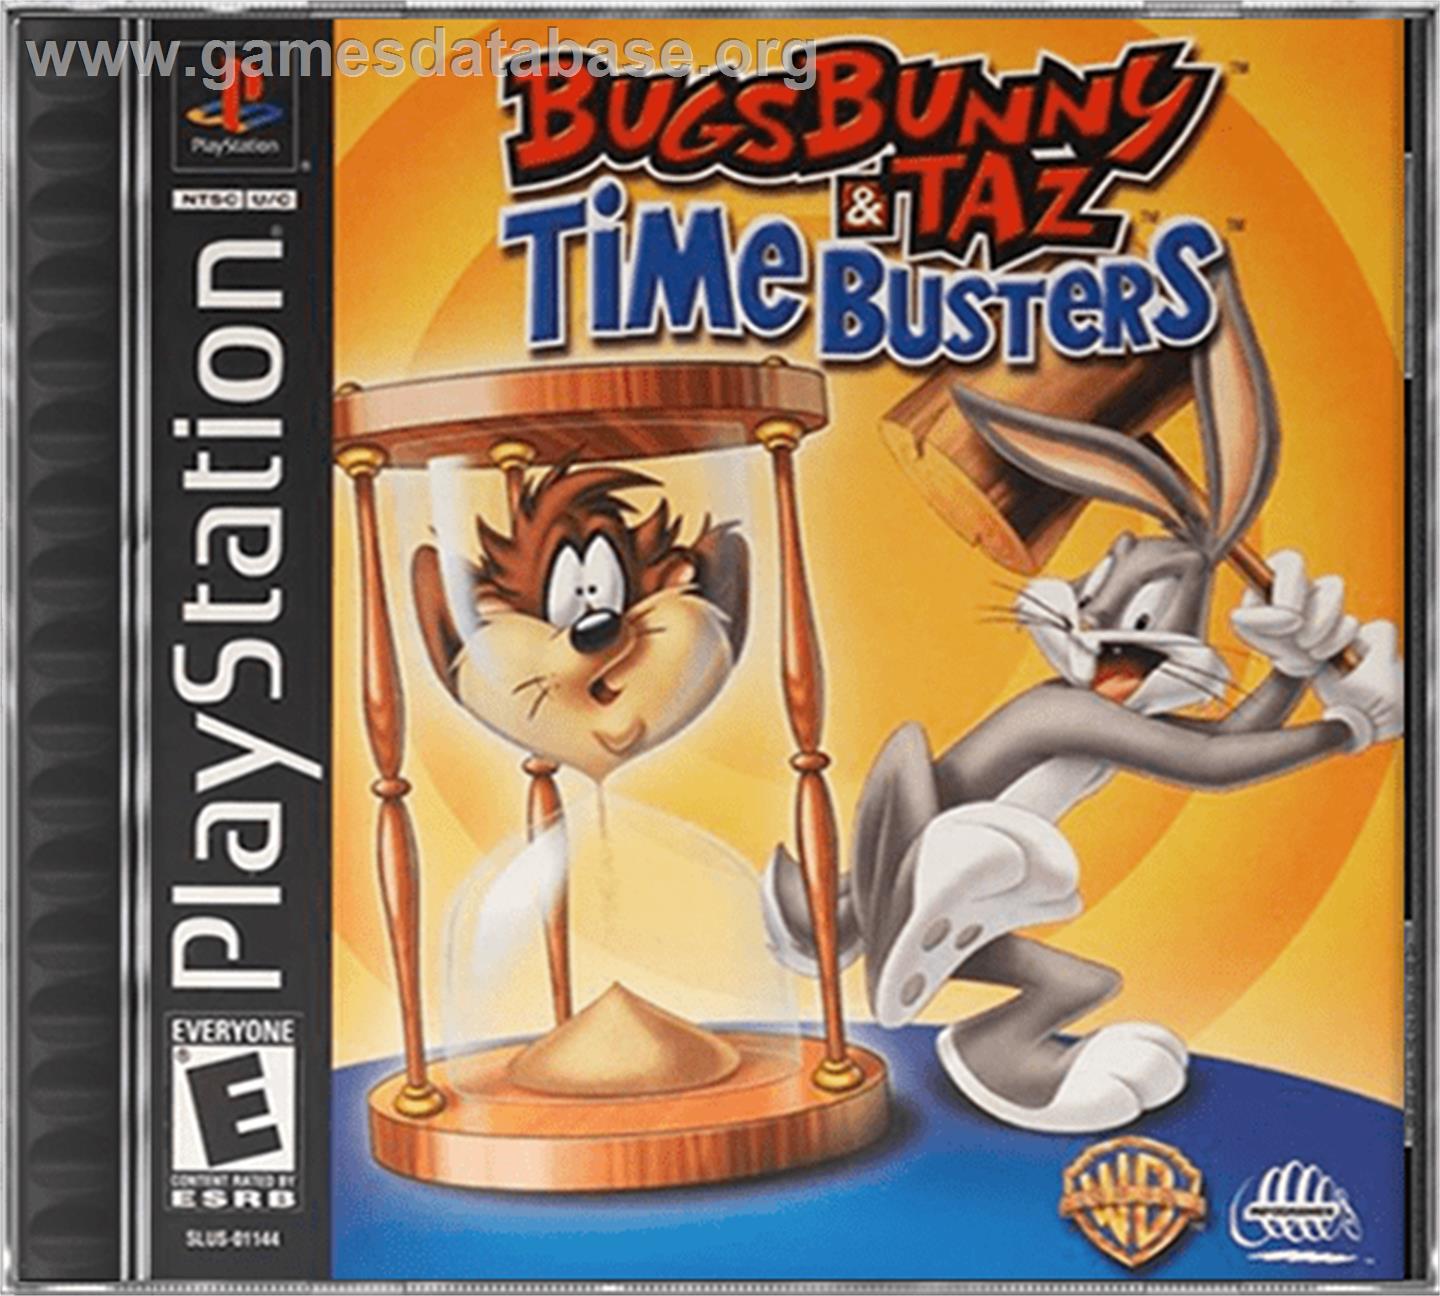 Bugs Bunny & Taz: Time Busters - Sony Playstation - Artwork - Box